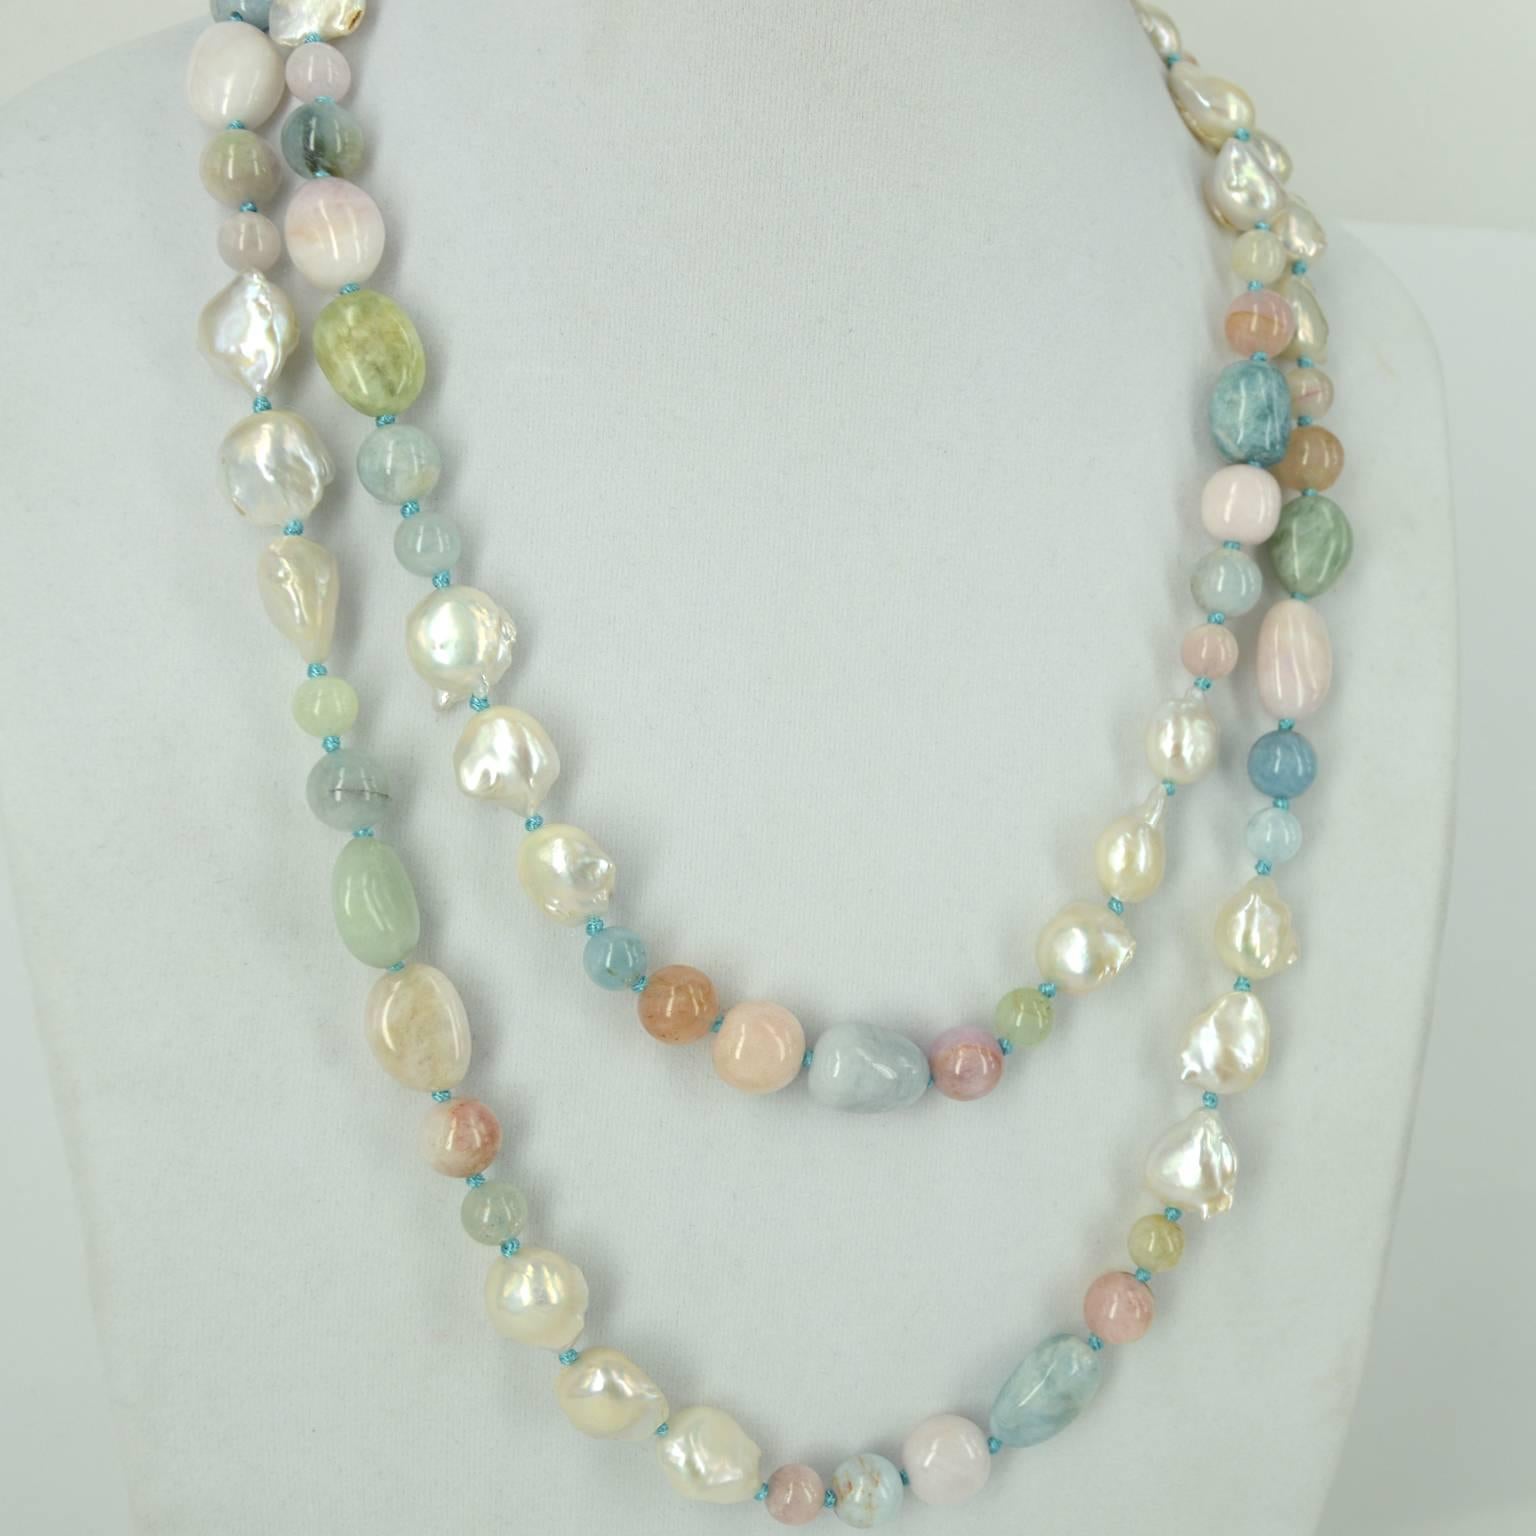 Pastel shades of Beryl in blue, pink and mint with creamy 14mm Fresh Water Keshi Pearls and a 9mm Round Sterling Silver Clasp are found in this beautifully hand knotted necklace. Small Beryl beads are 8mm round large round beads are 10mm round. Long